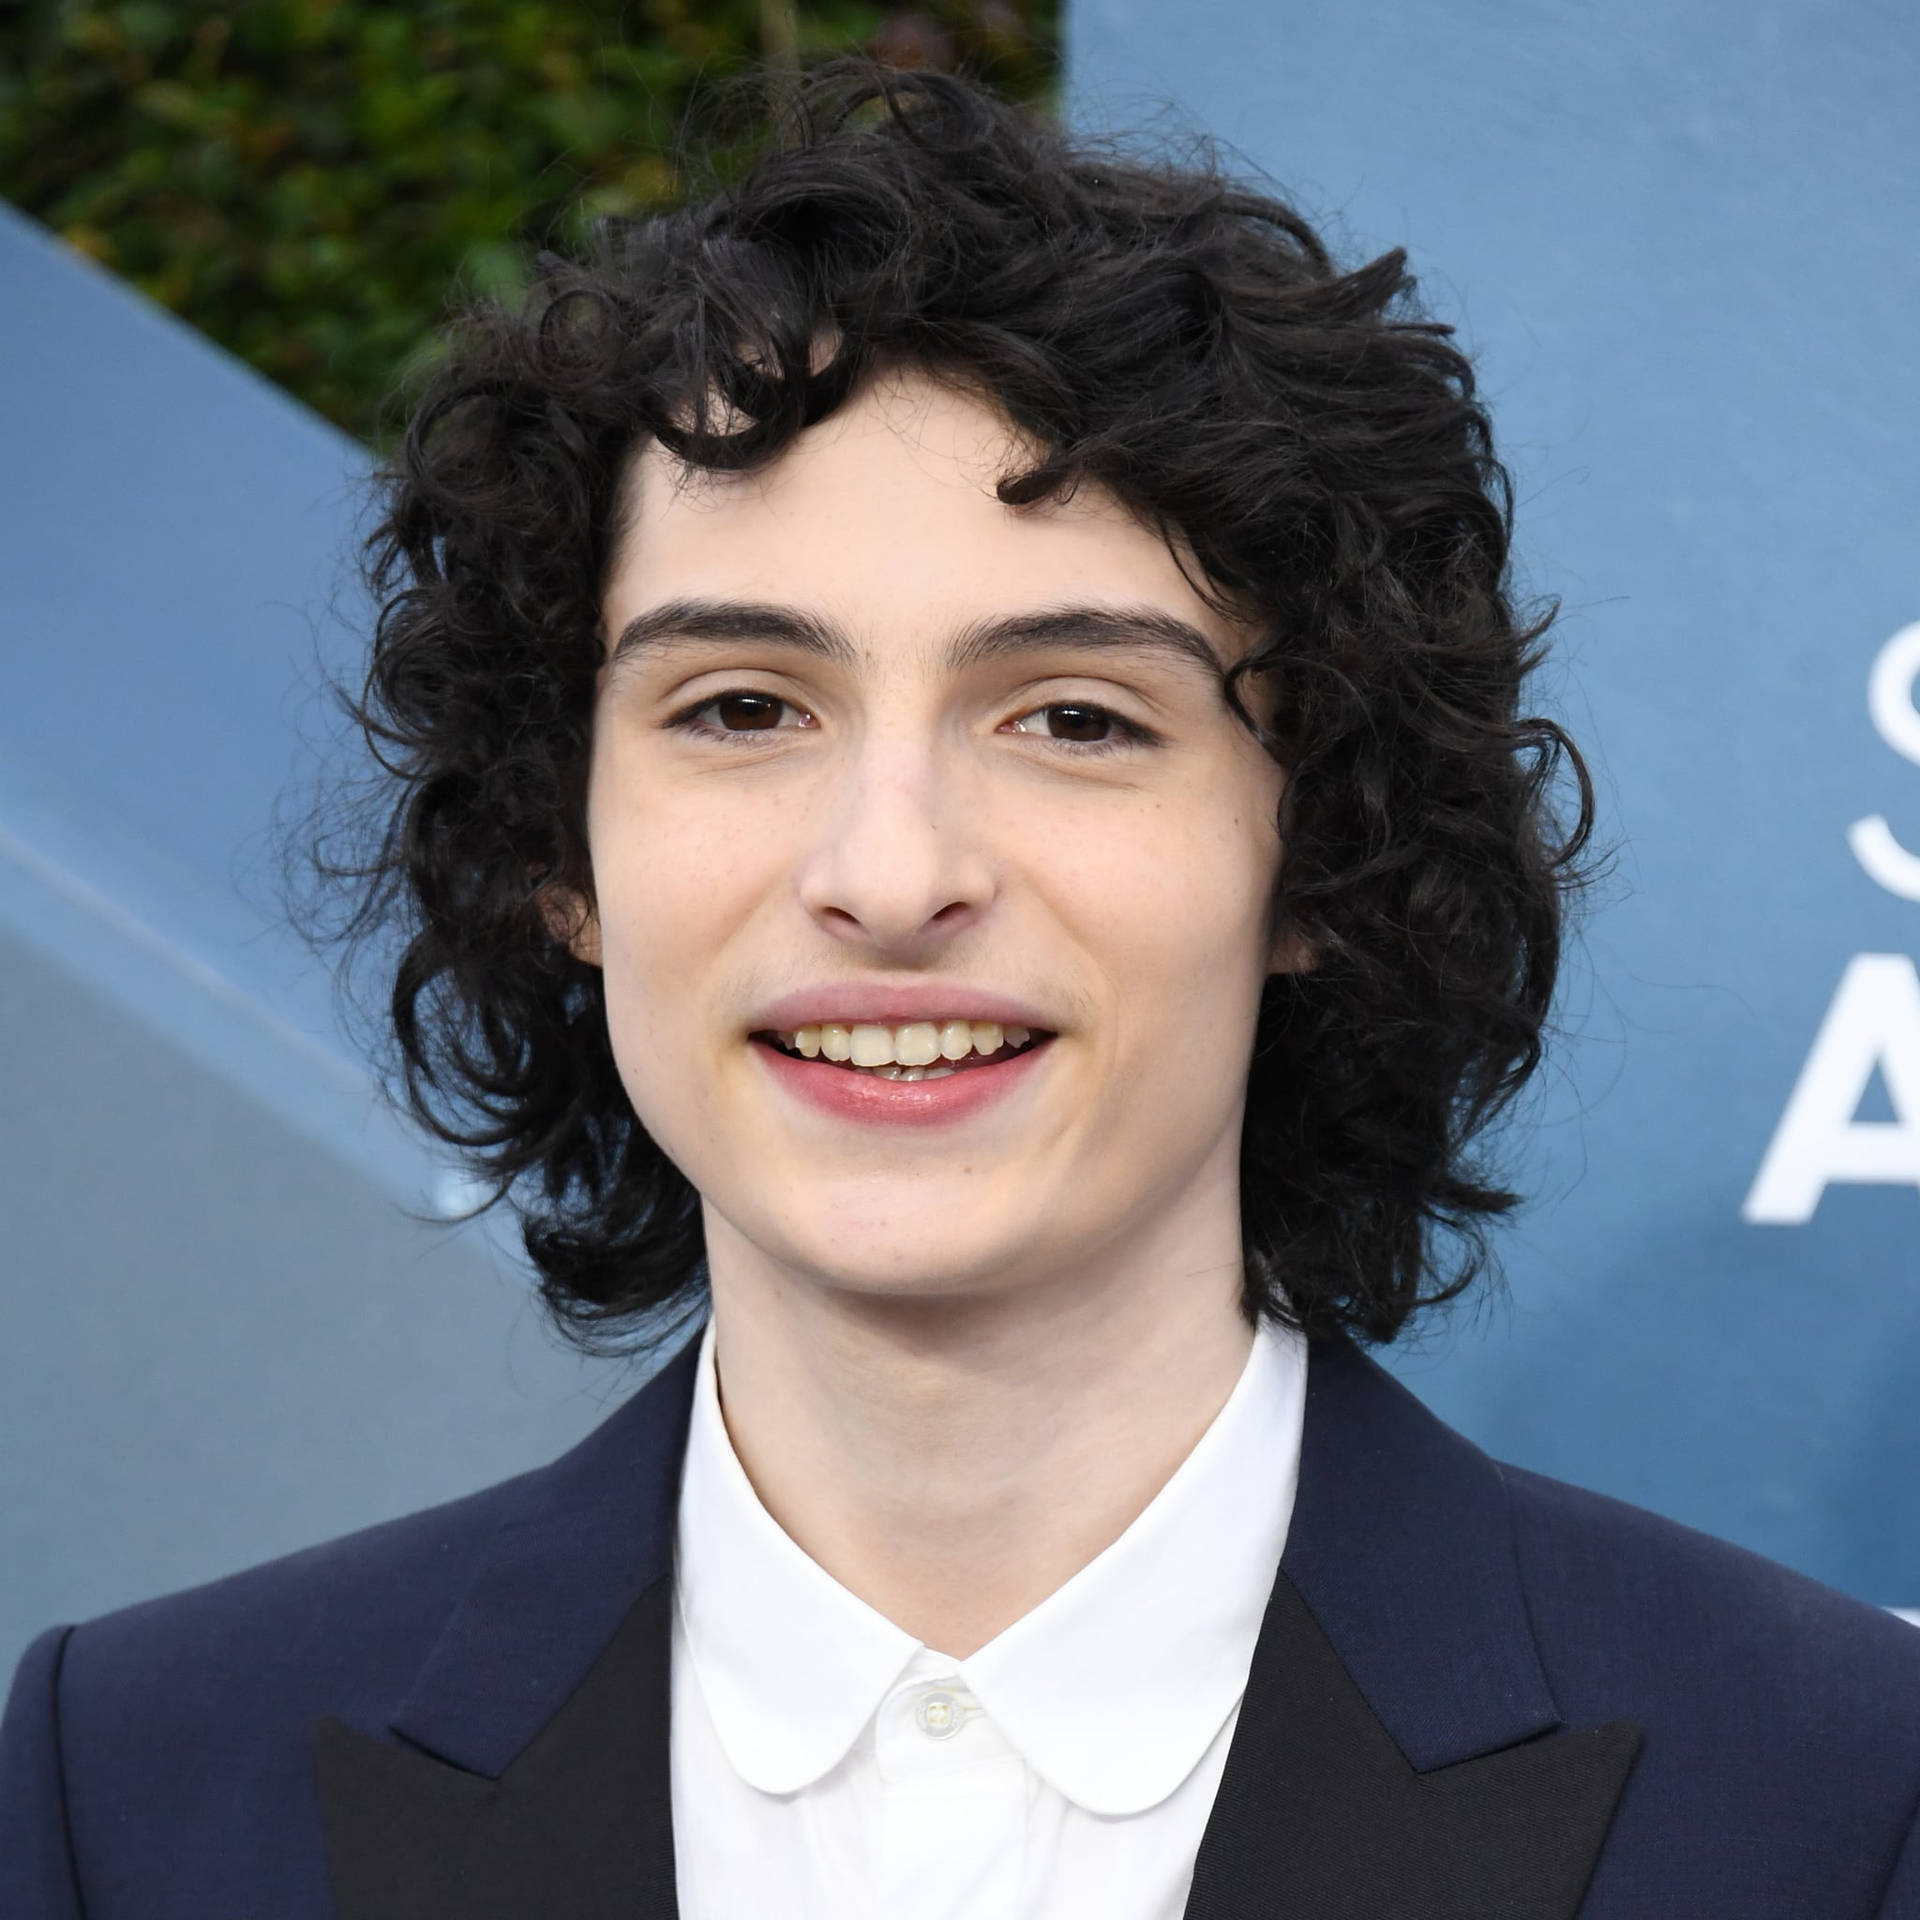 Finn Wolfhard In Coat And Tie